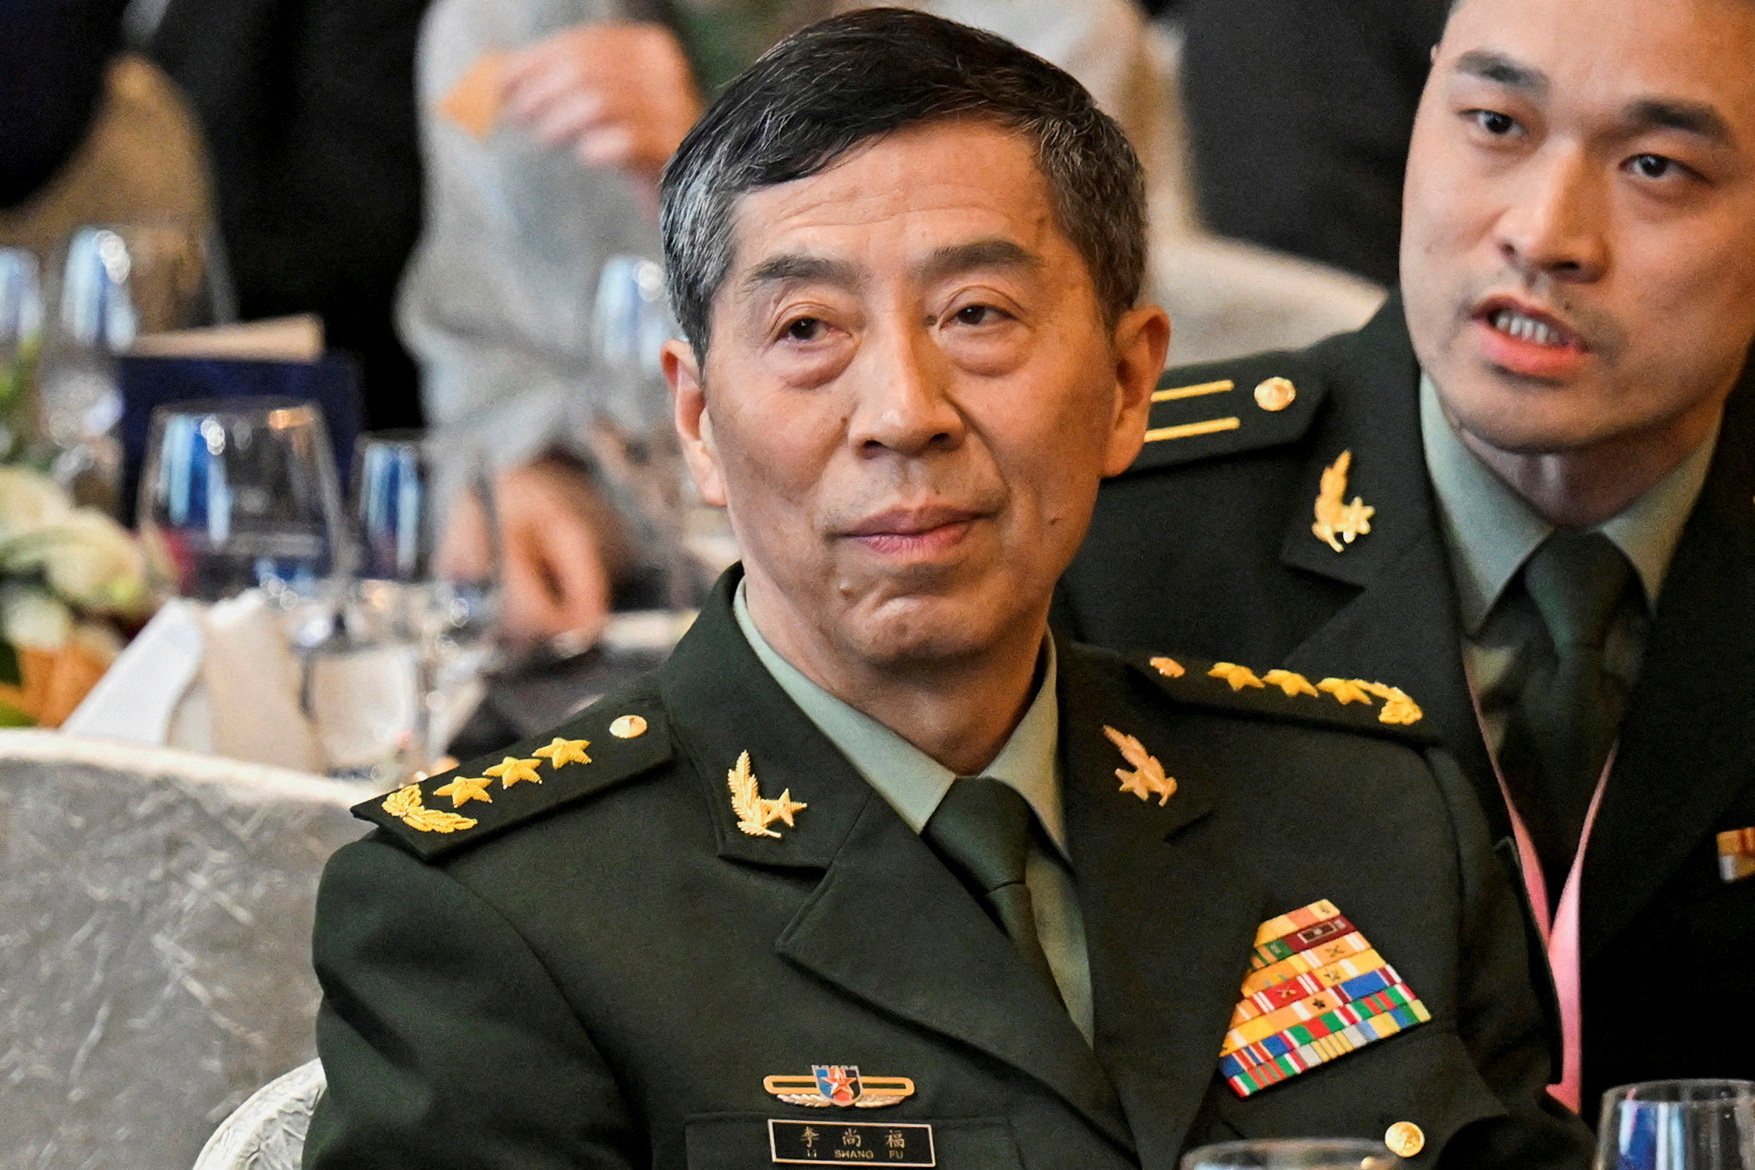 A person close to the PLA says Li’s case was handled in a “special and abnormal way” during an anti-corruption campaign within the forces that probed a number of senior generals. Photo: Reuters